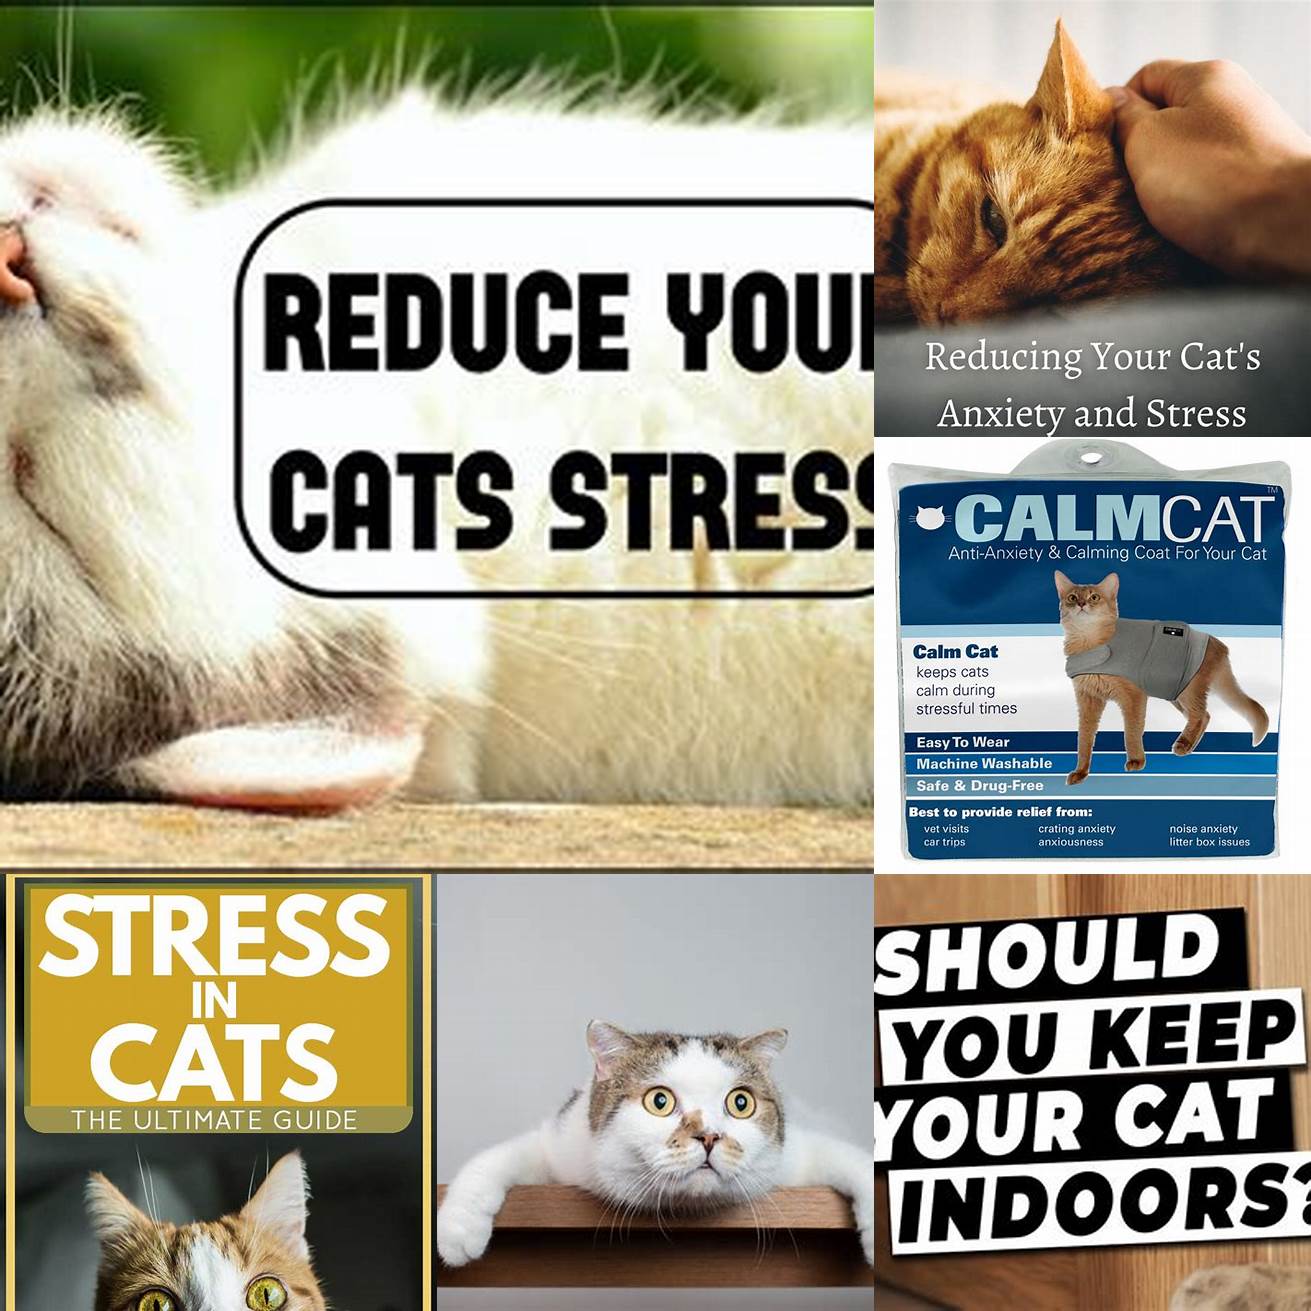 Keep your cat stress-free